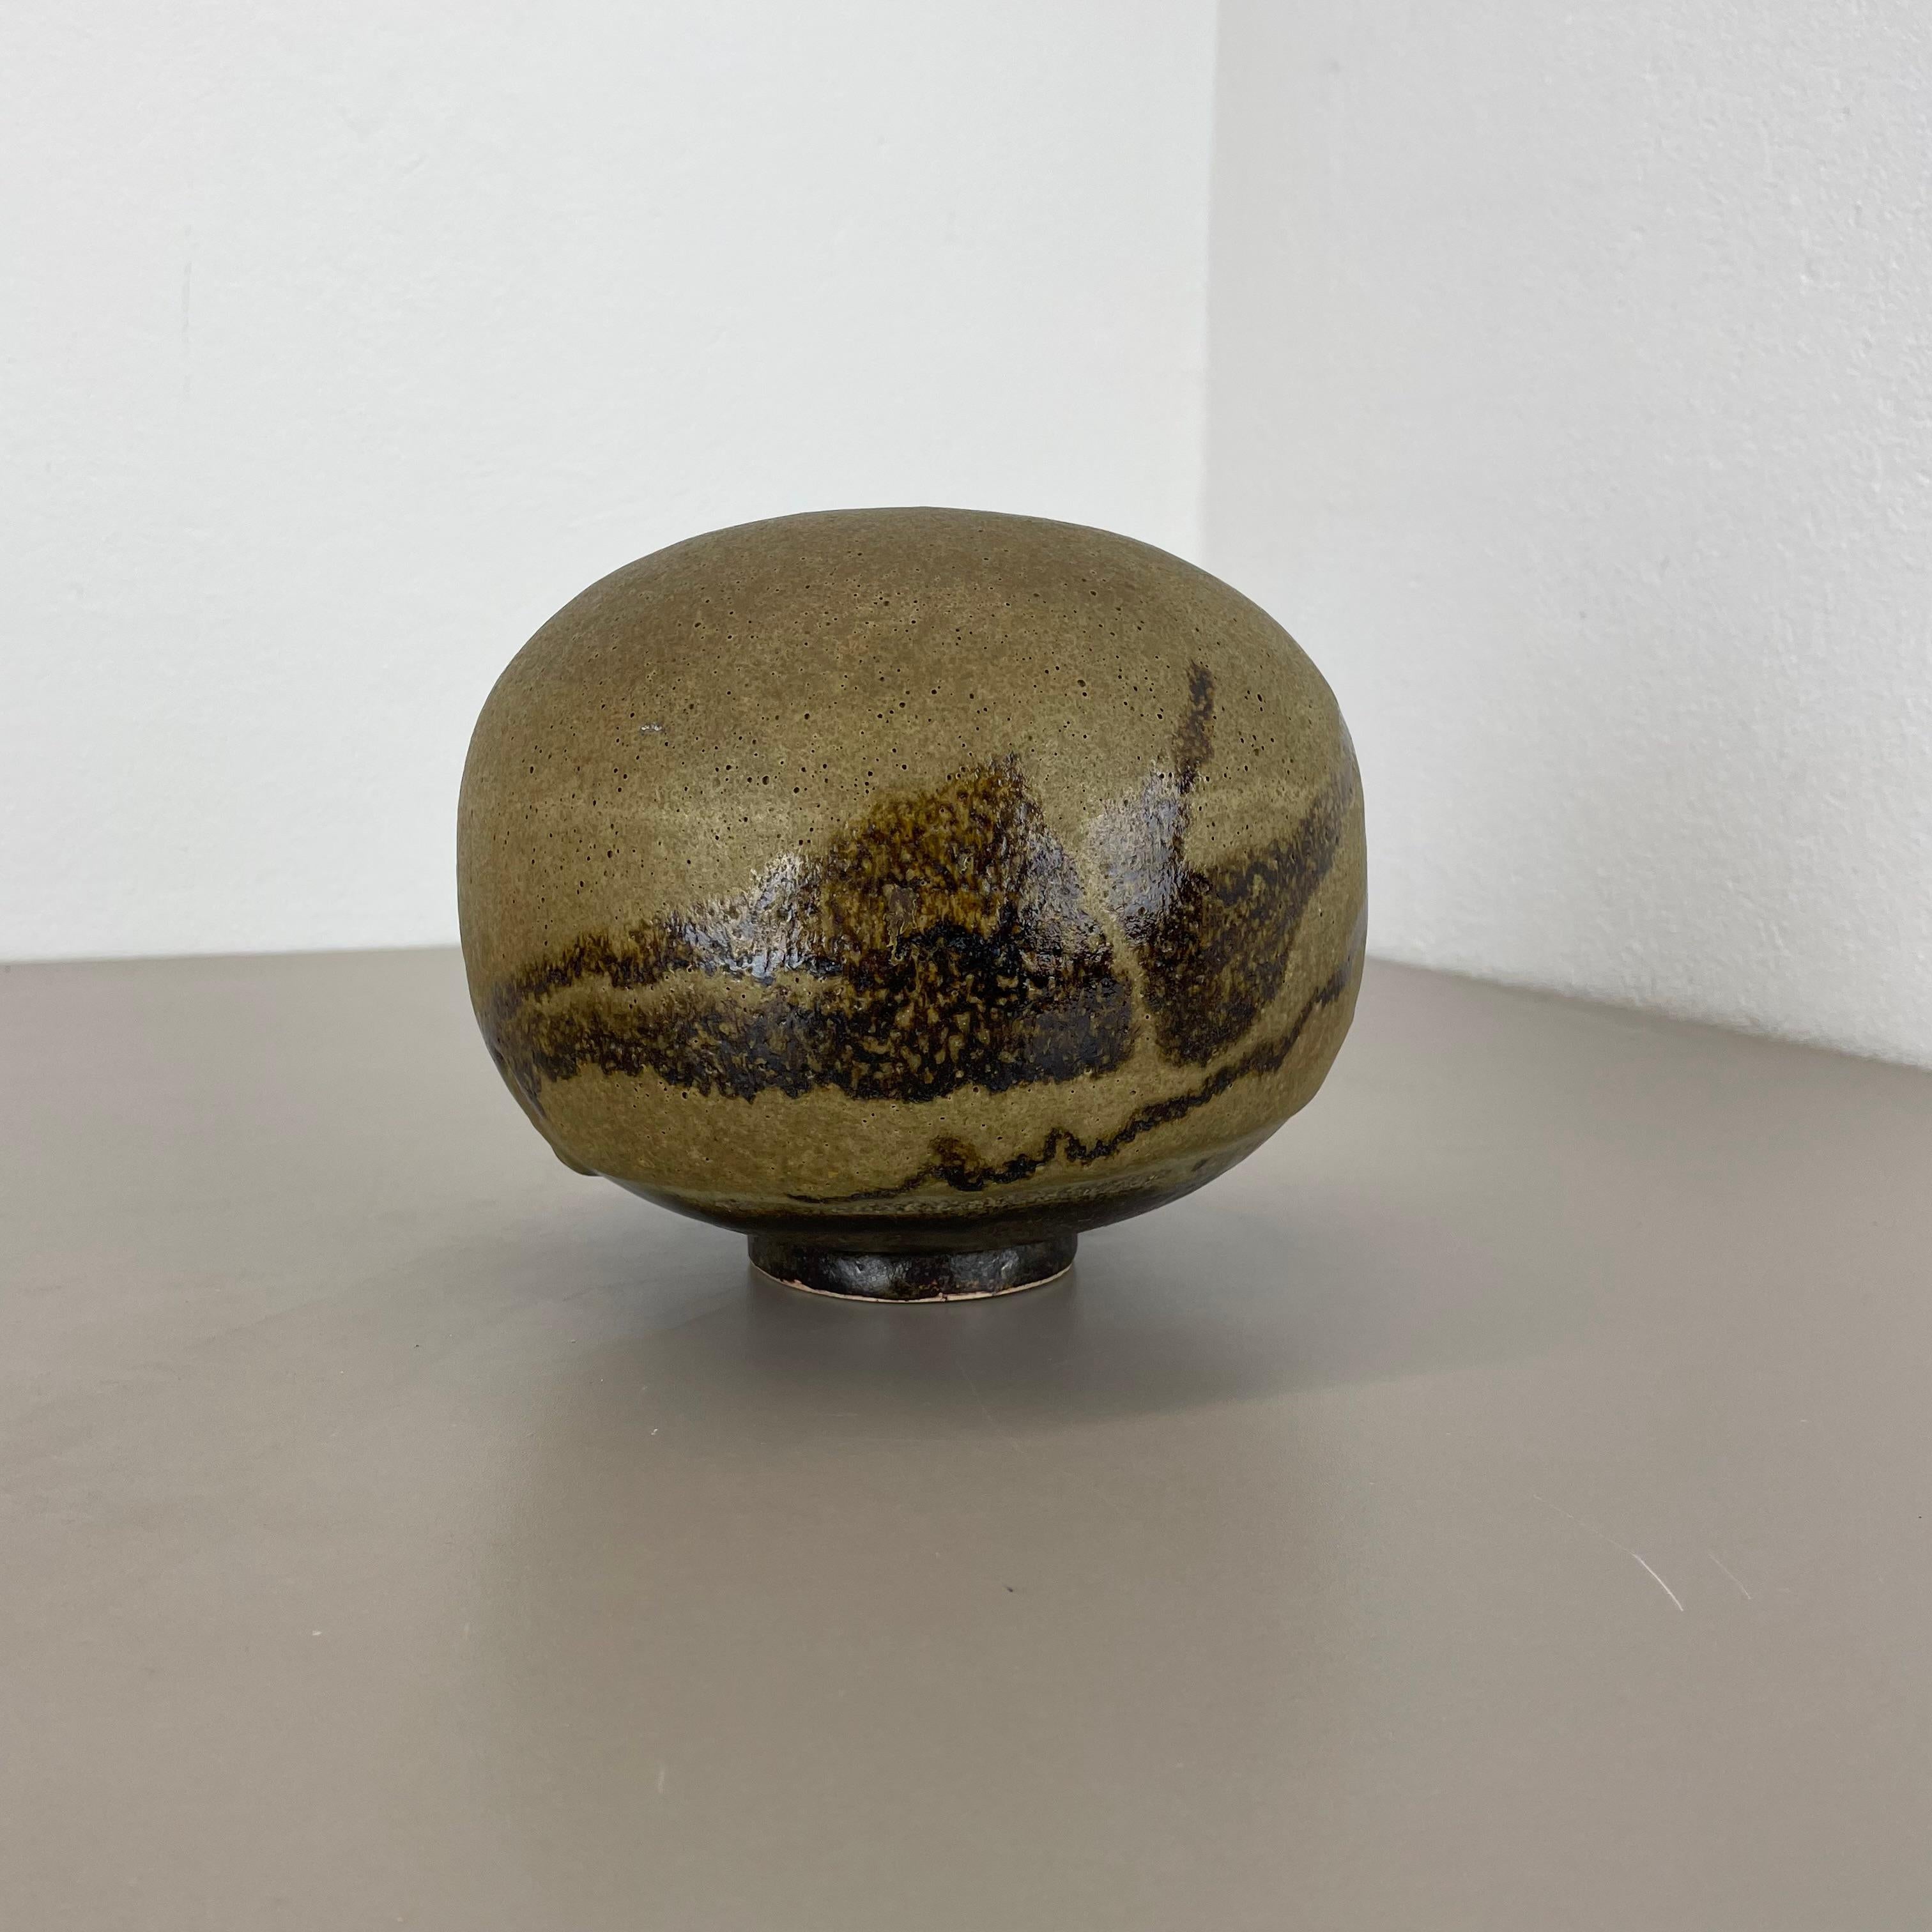 Large Sculptural Studio Pottery Vase Object by Dieter Crumbiegel, Germany, 1980s For Sale 1